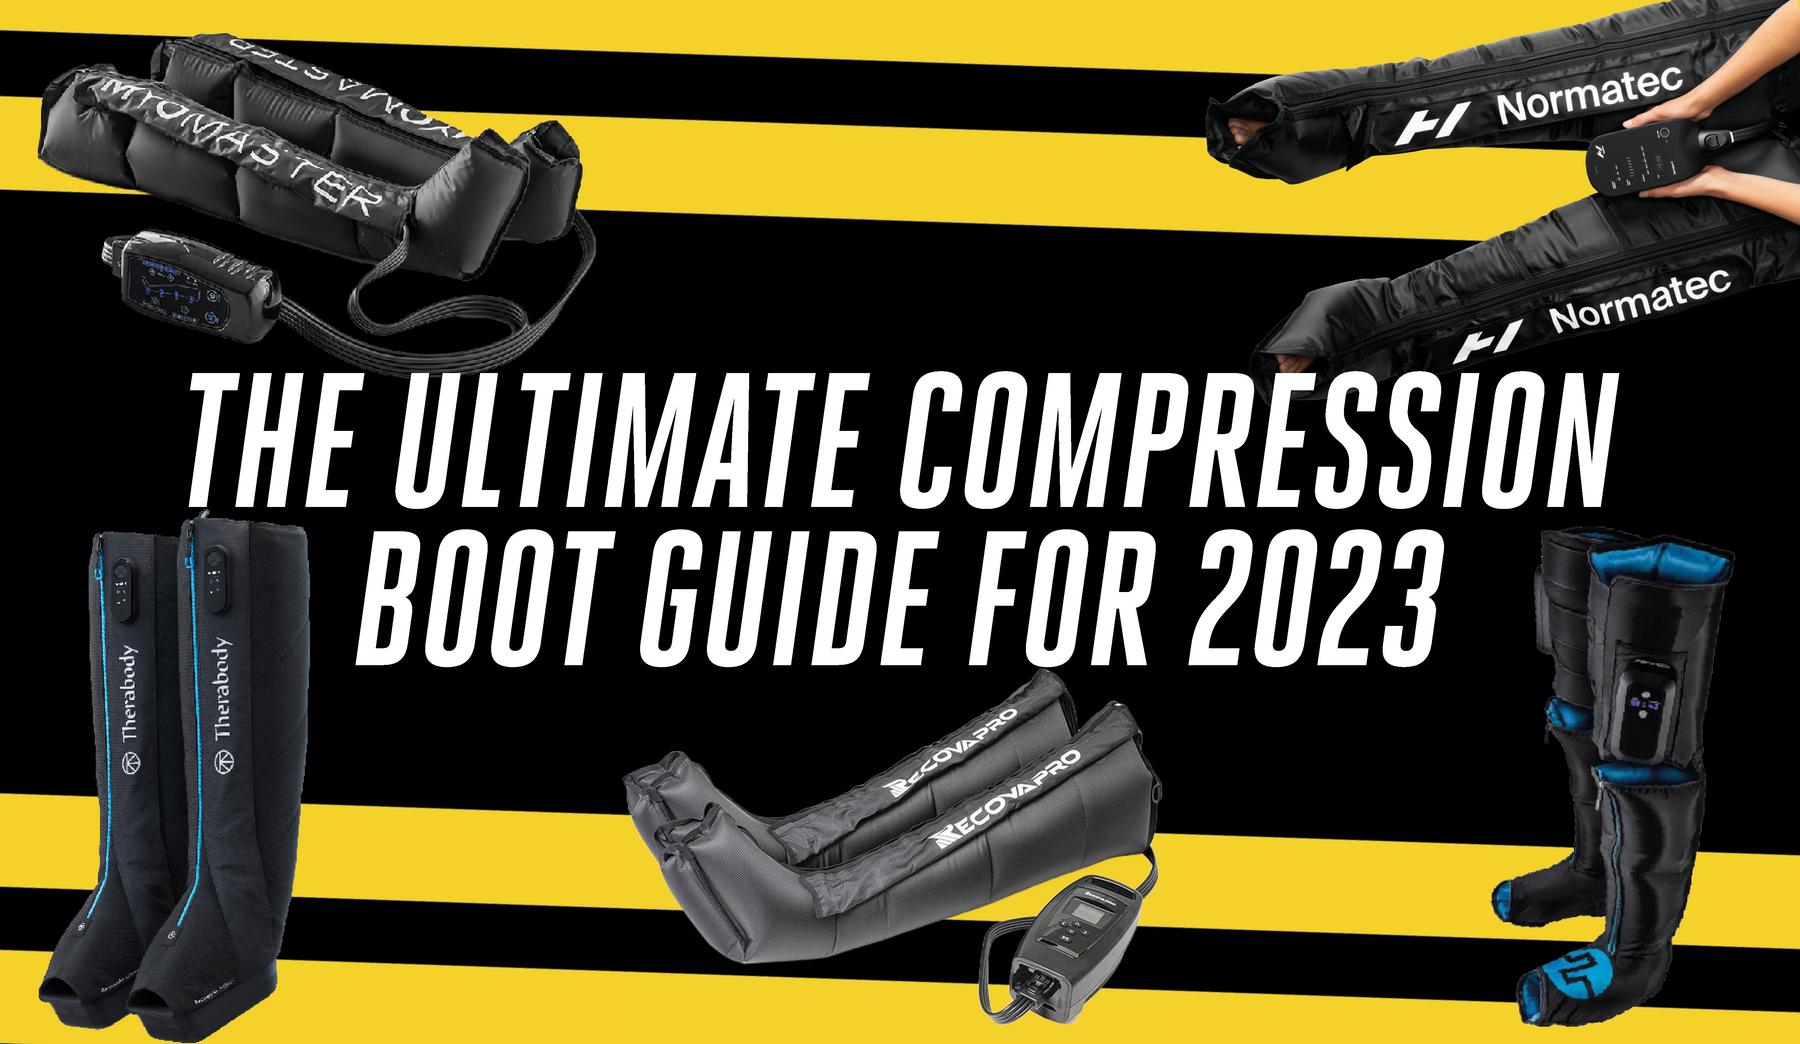 The Ultimate Recovery / Compression Boot Guide for 2023